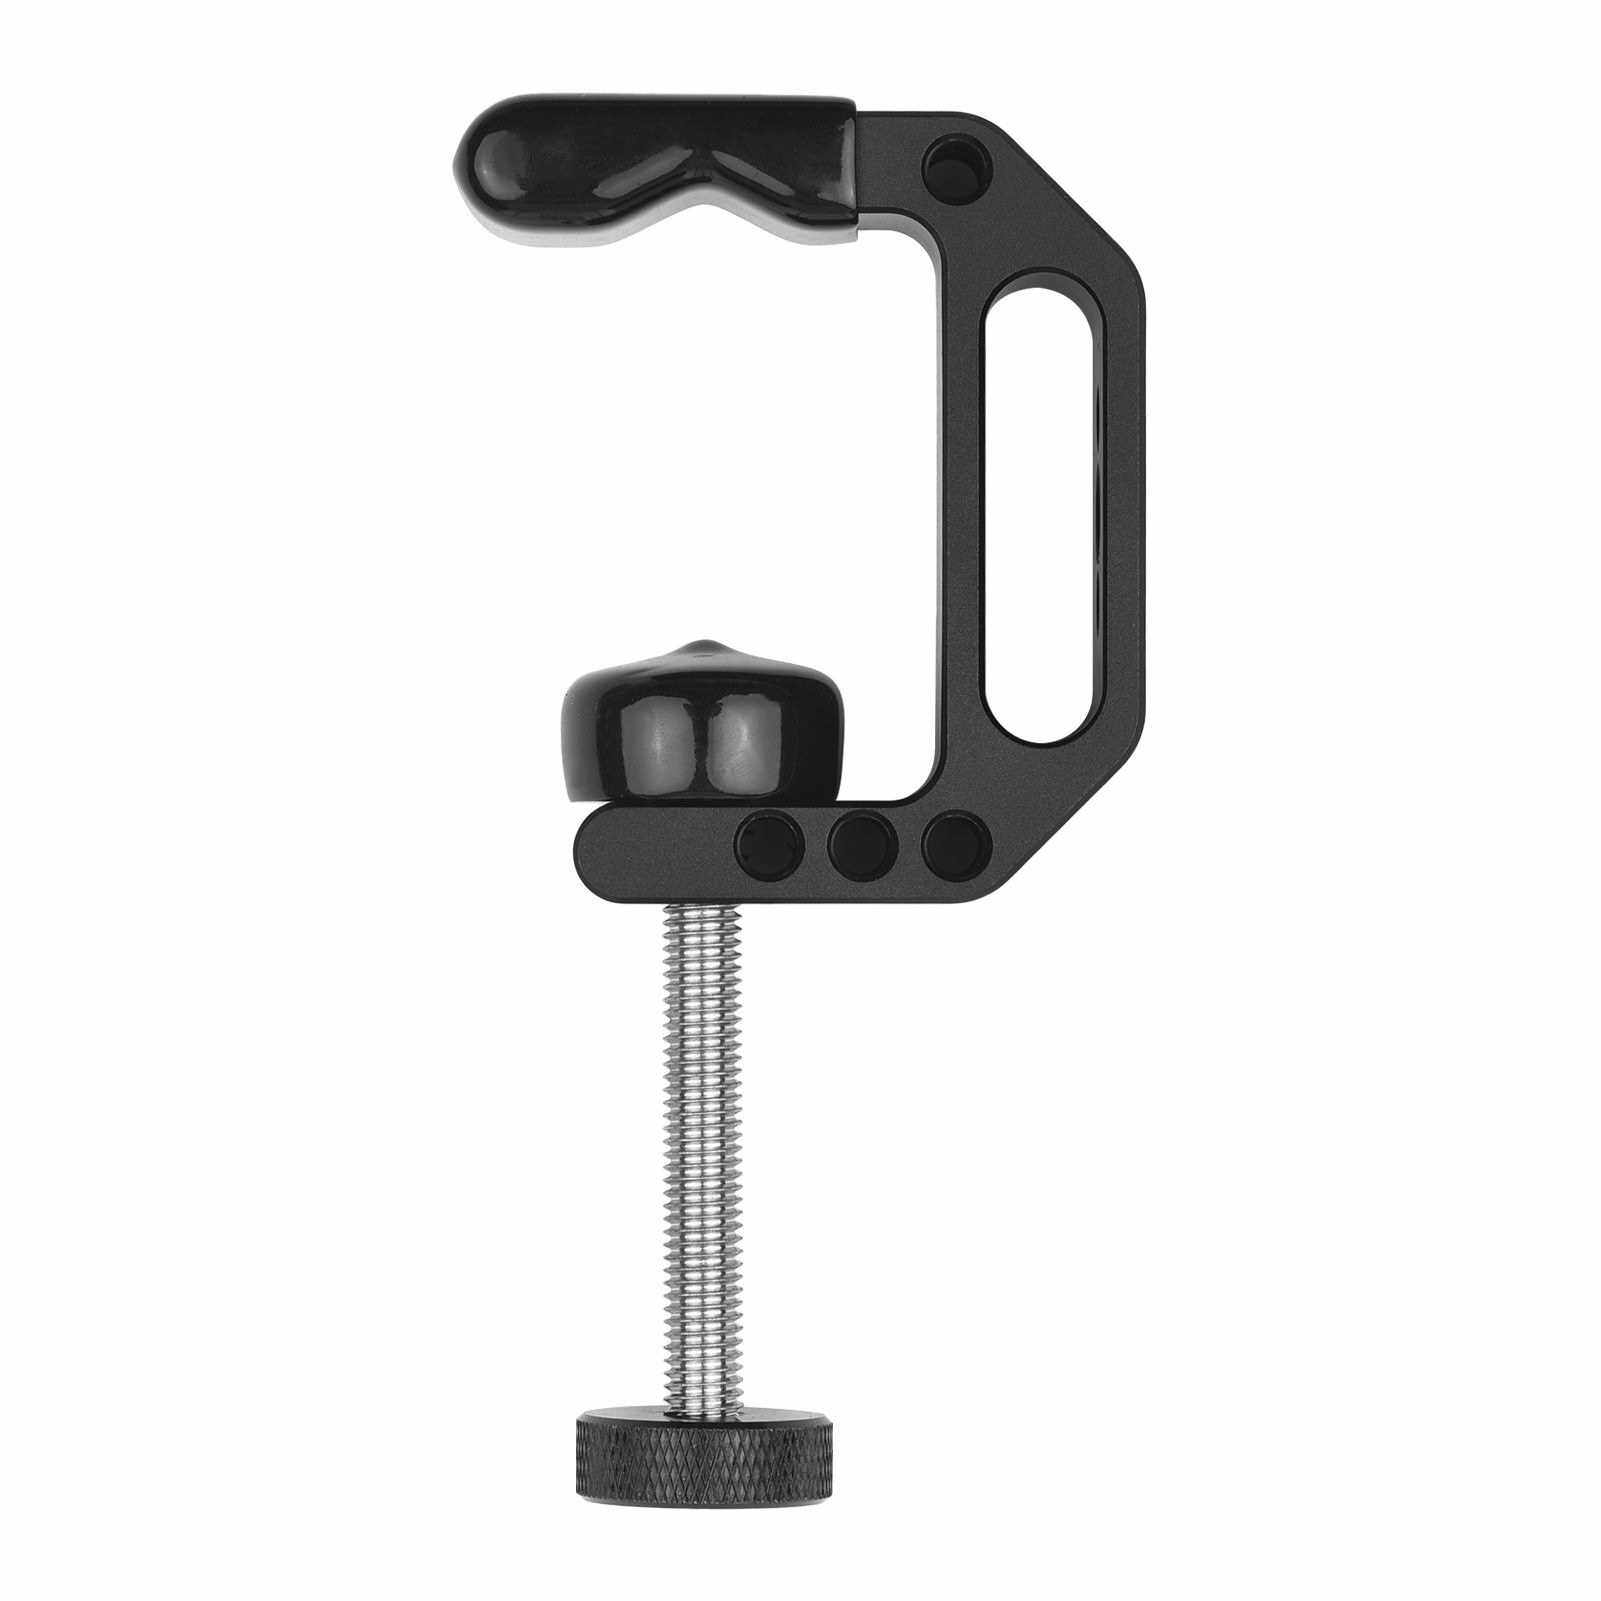 Universal C Clamp Heavy Duty Desktop Mount Clamp Tripod Light Stand Clamp with Standard 1/4 Inch & 3/8 Inch Screw Holes for Mounting Video Monitor Flash Speedlite Microphone (Standard)